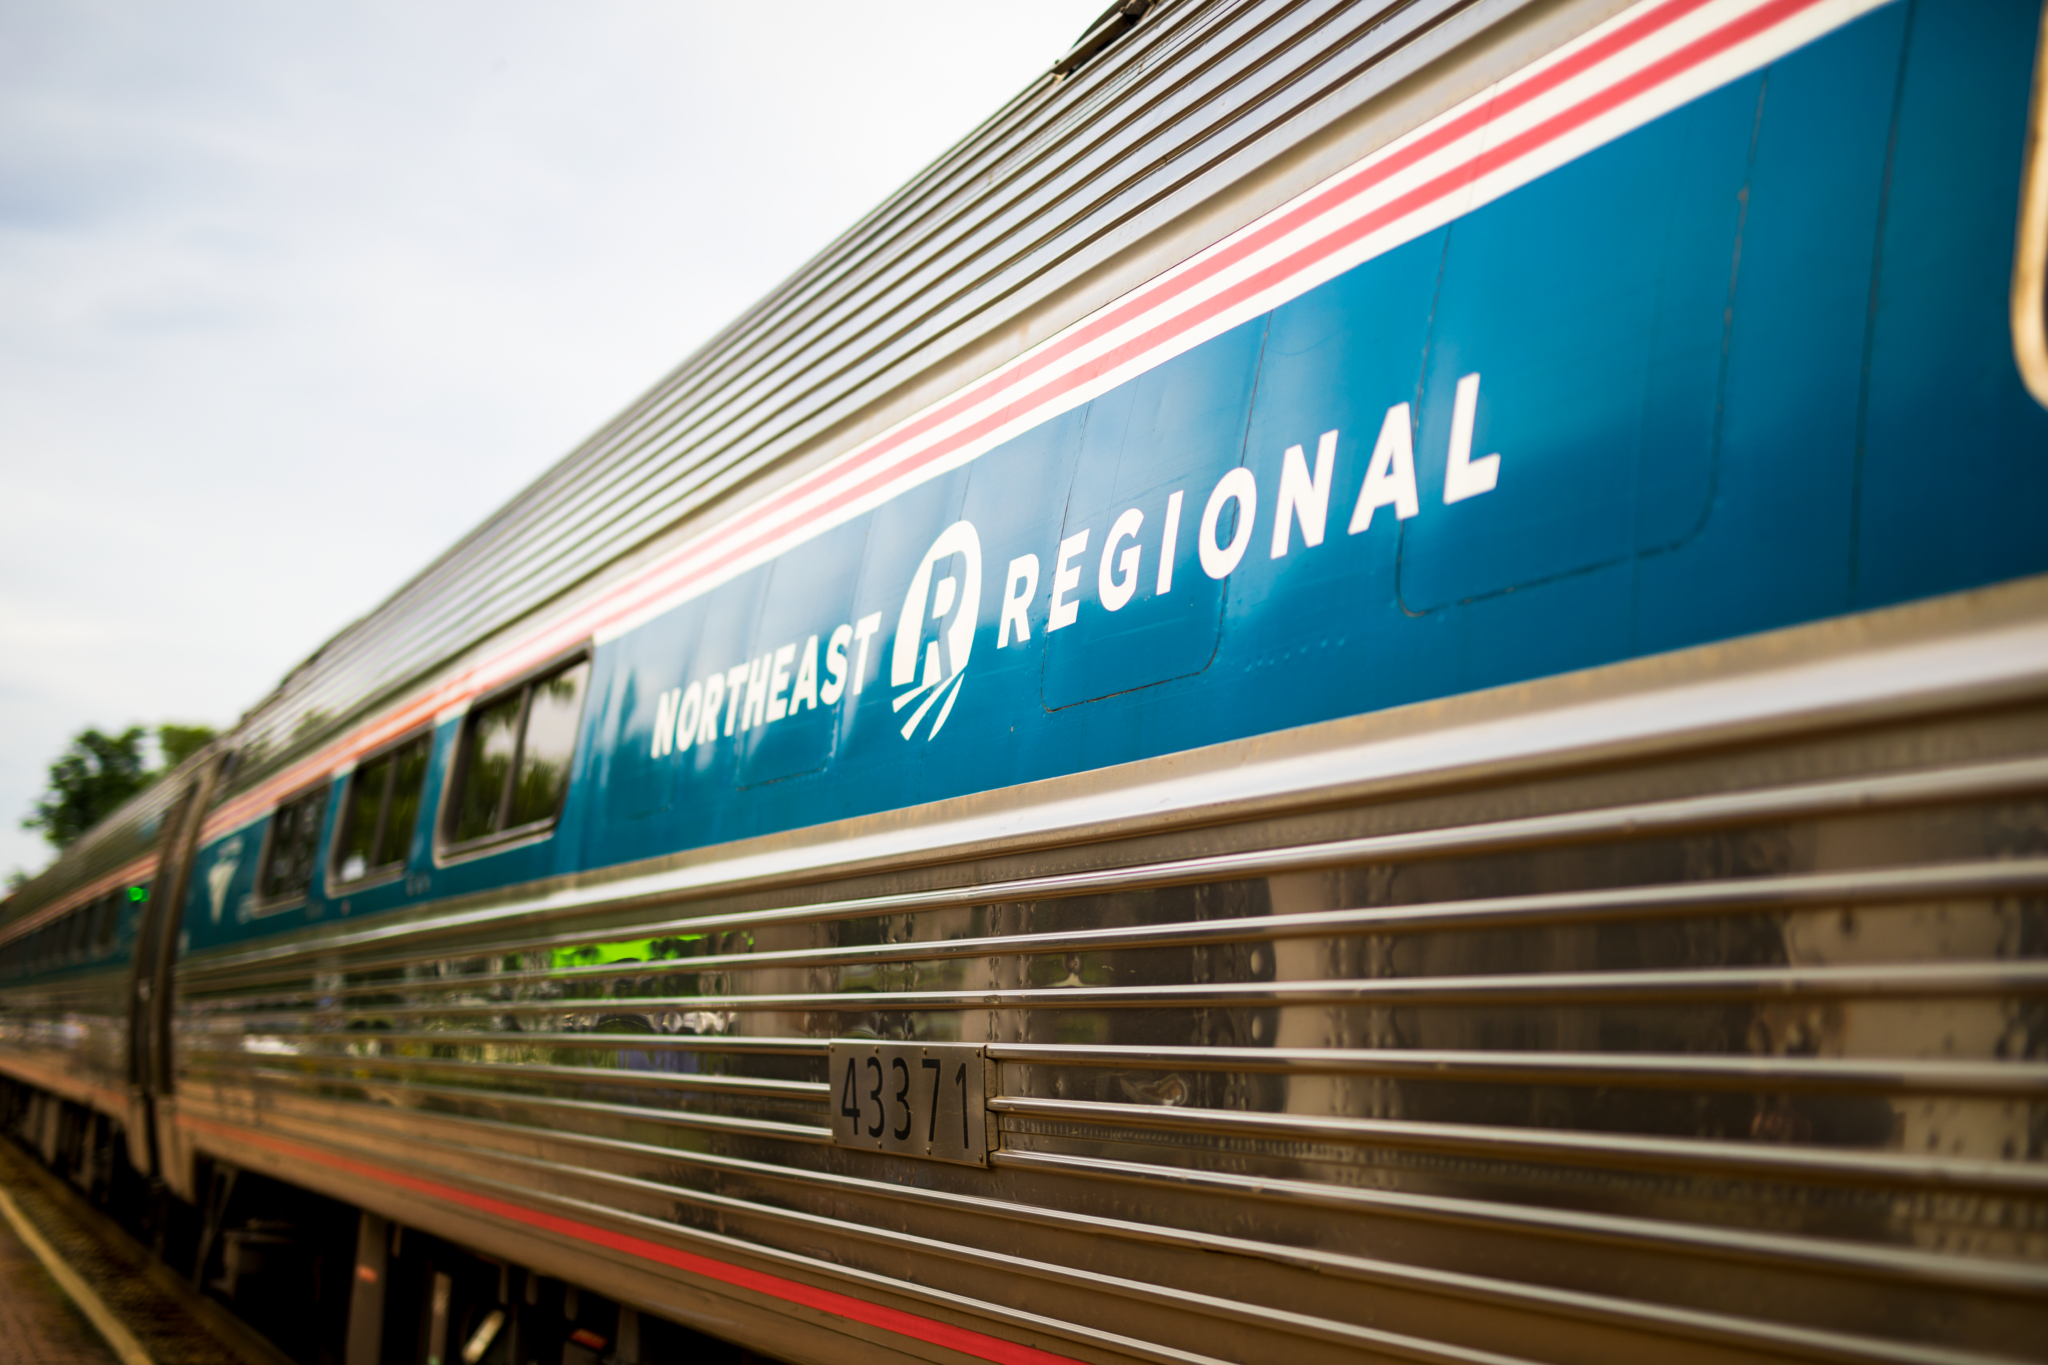 A Message From Amtrak President and CEO Richard Anderson